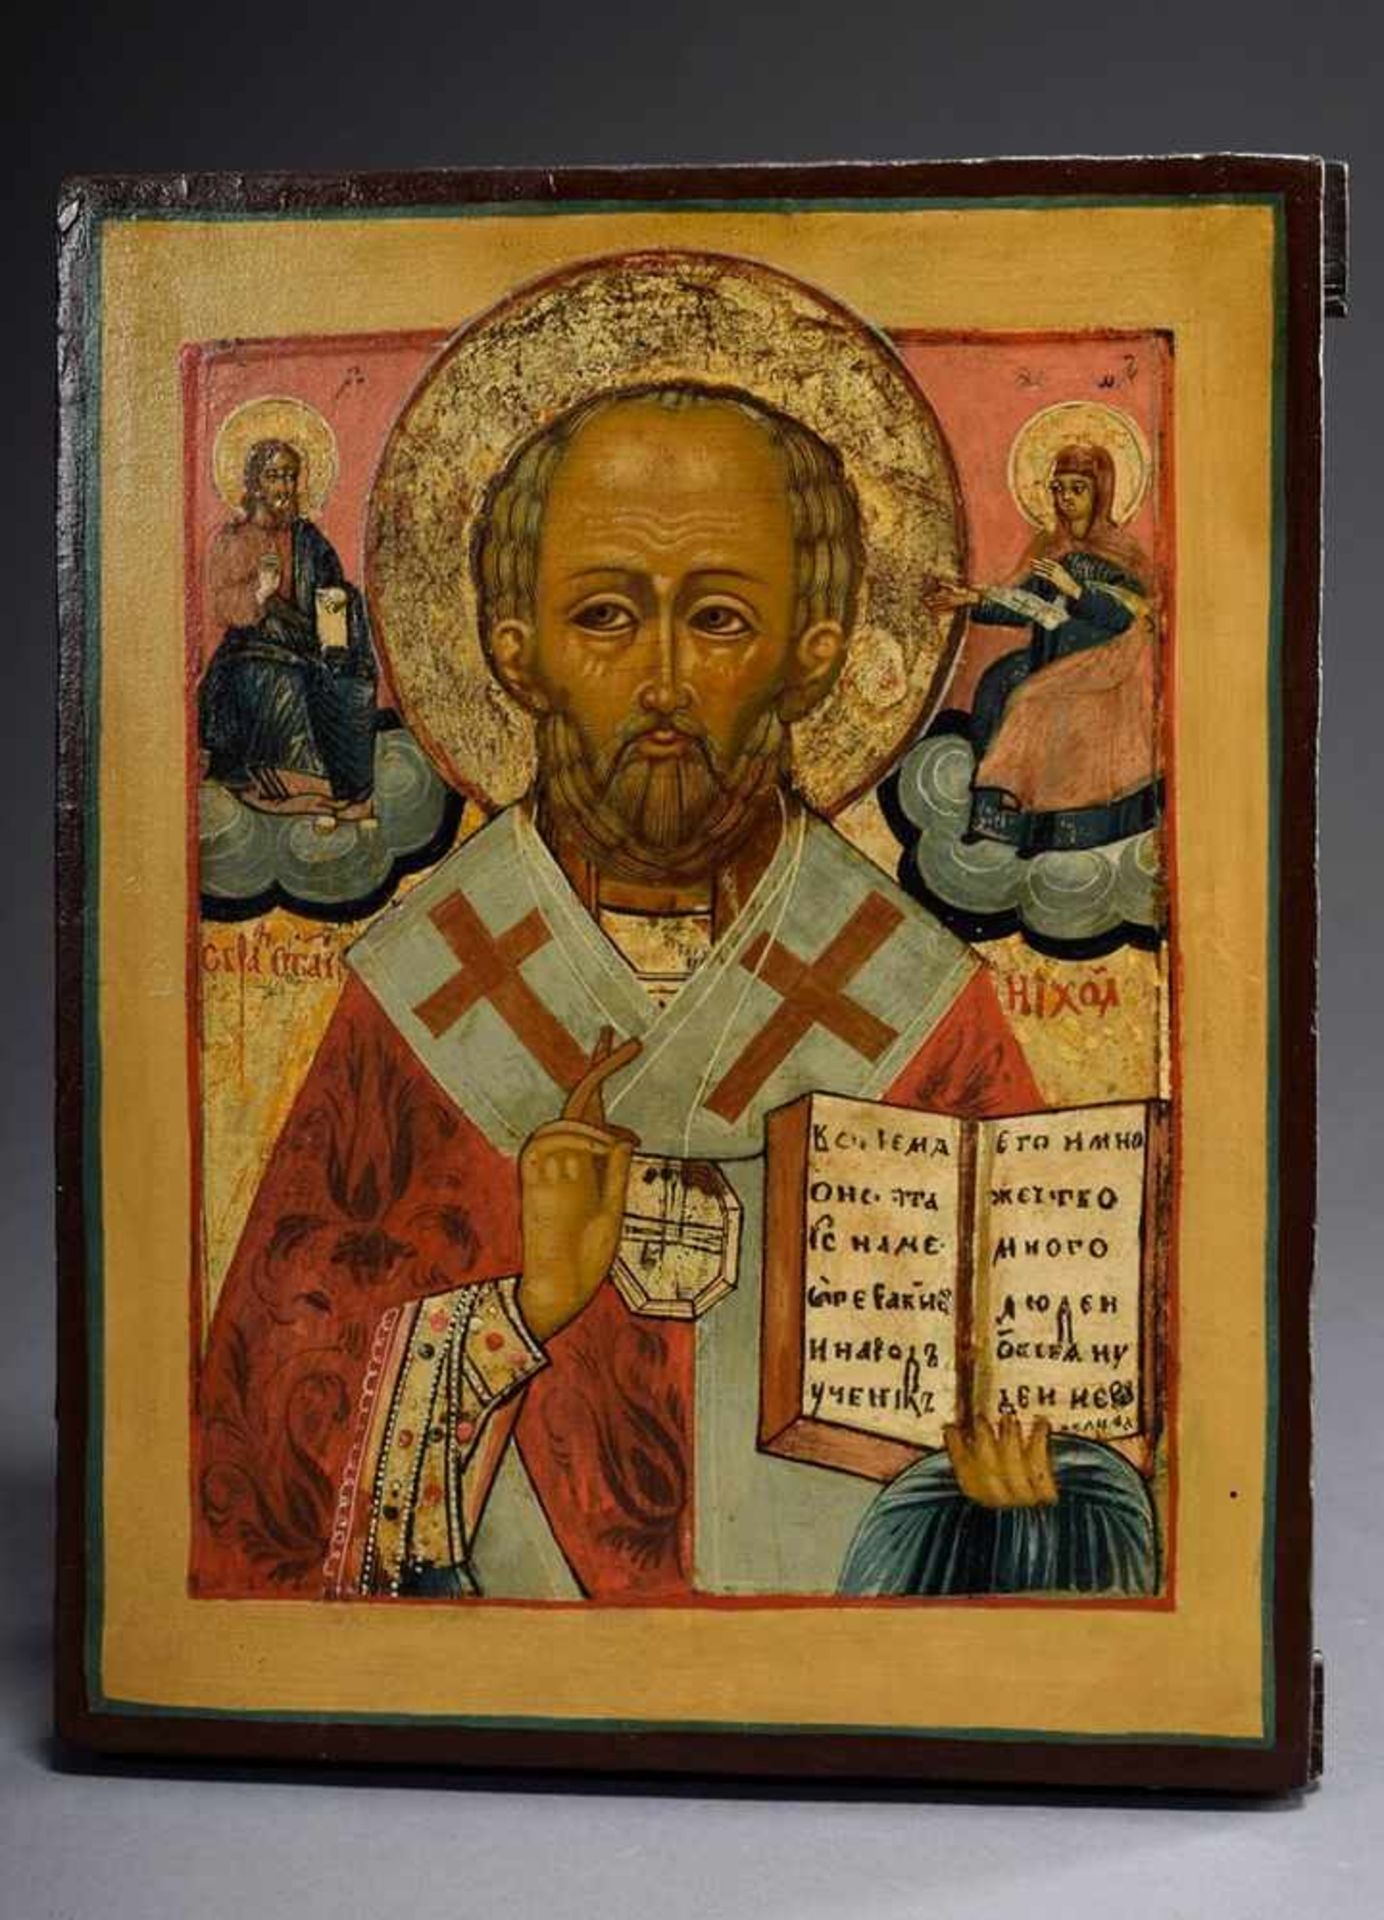 Russian icon "Saint Nicholas flanked by Christ and Mary" in light-coloured frame, egg tempera/